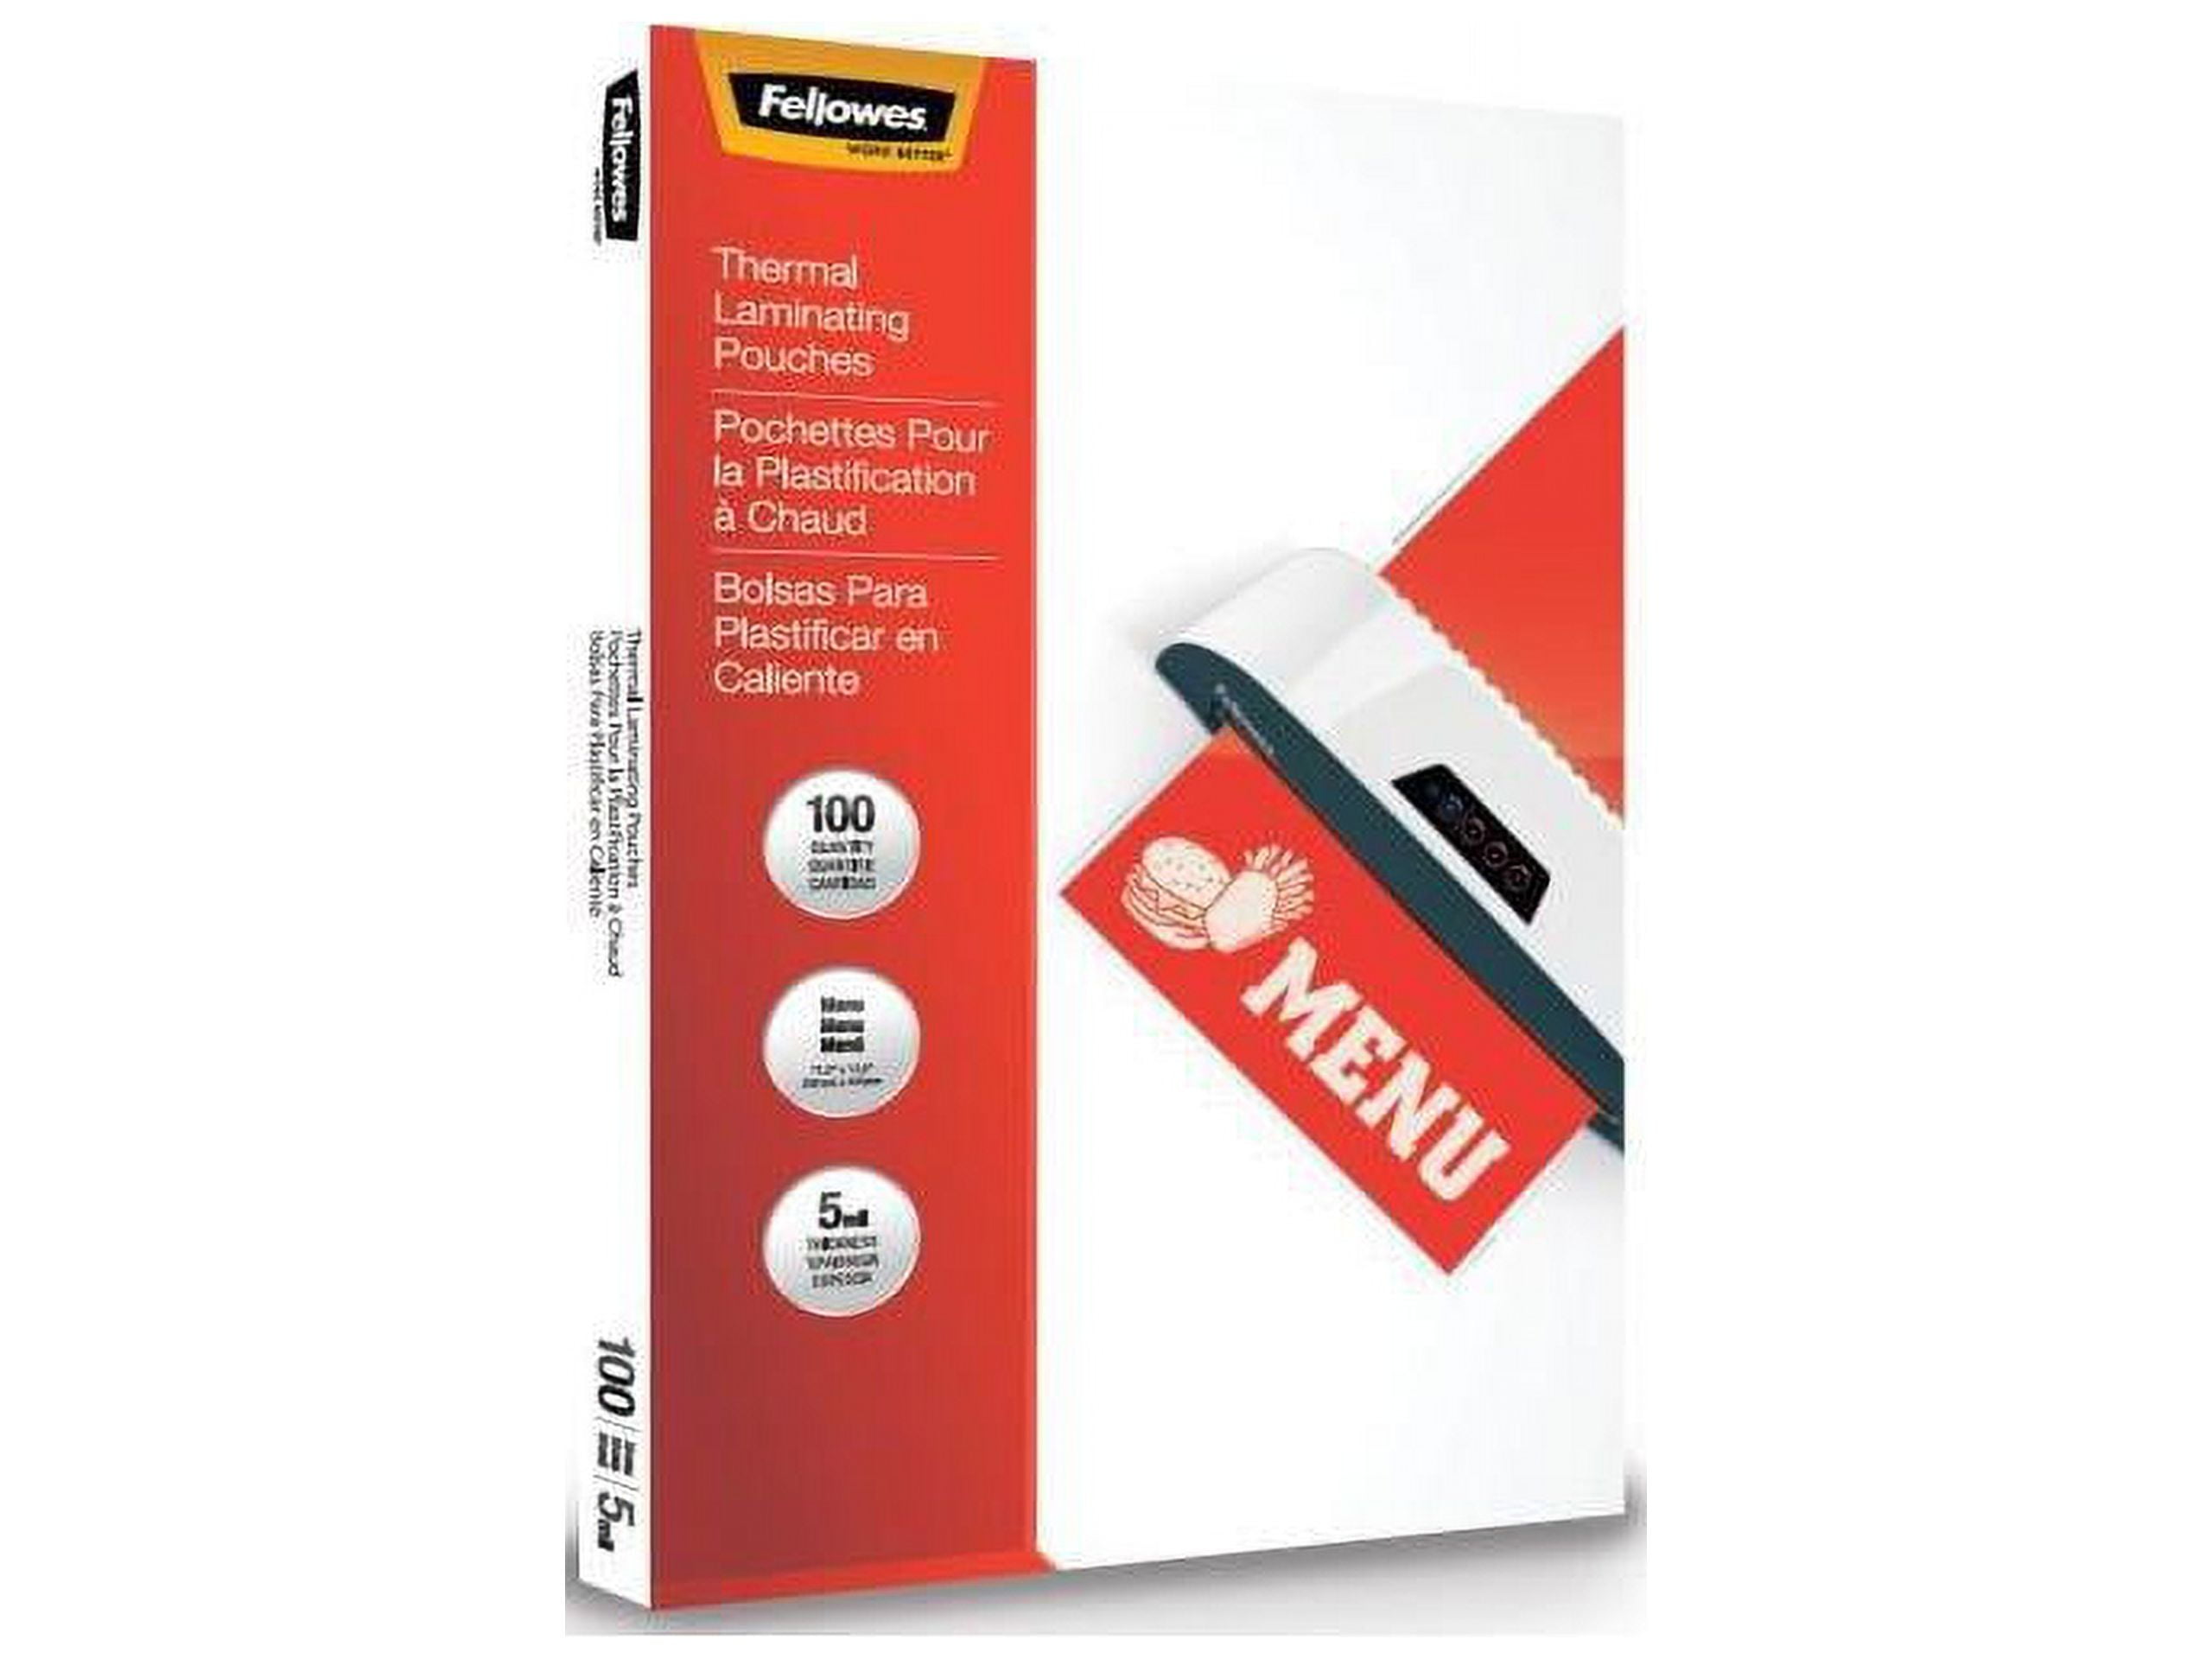 mil Menu Laminating Thermal 5 5746001 Fellowes 100/Pack Pouches